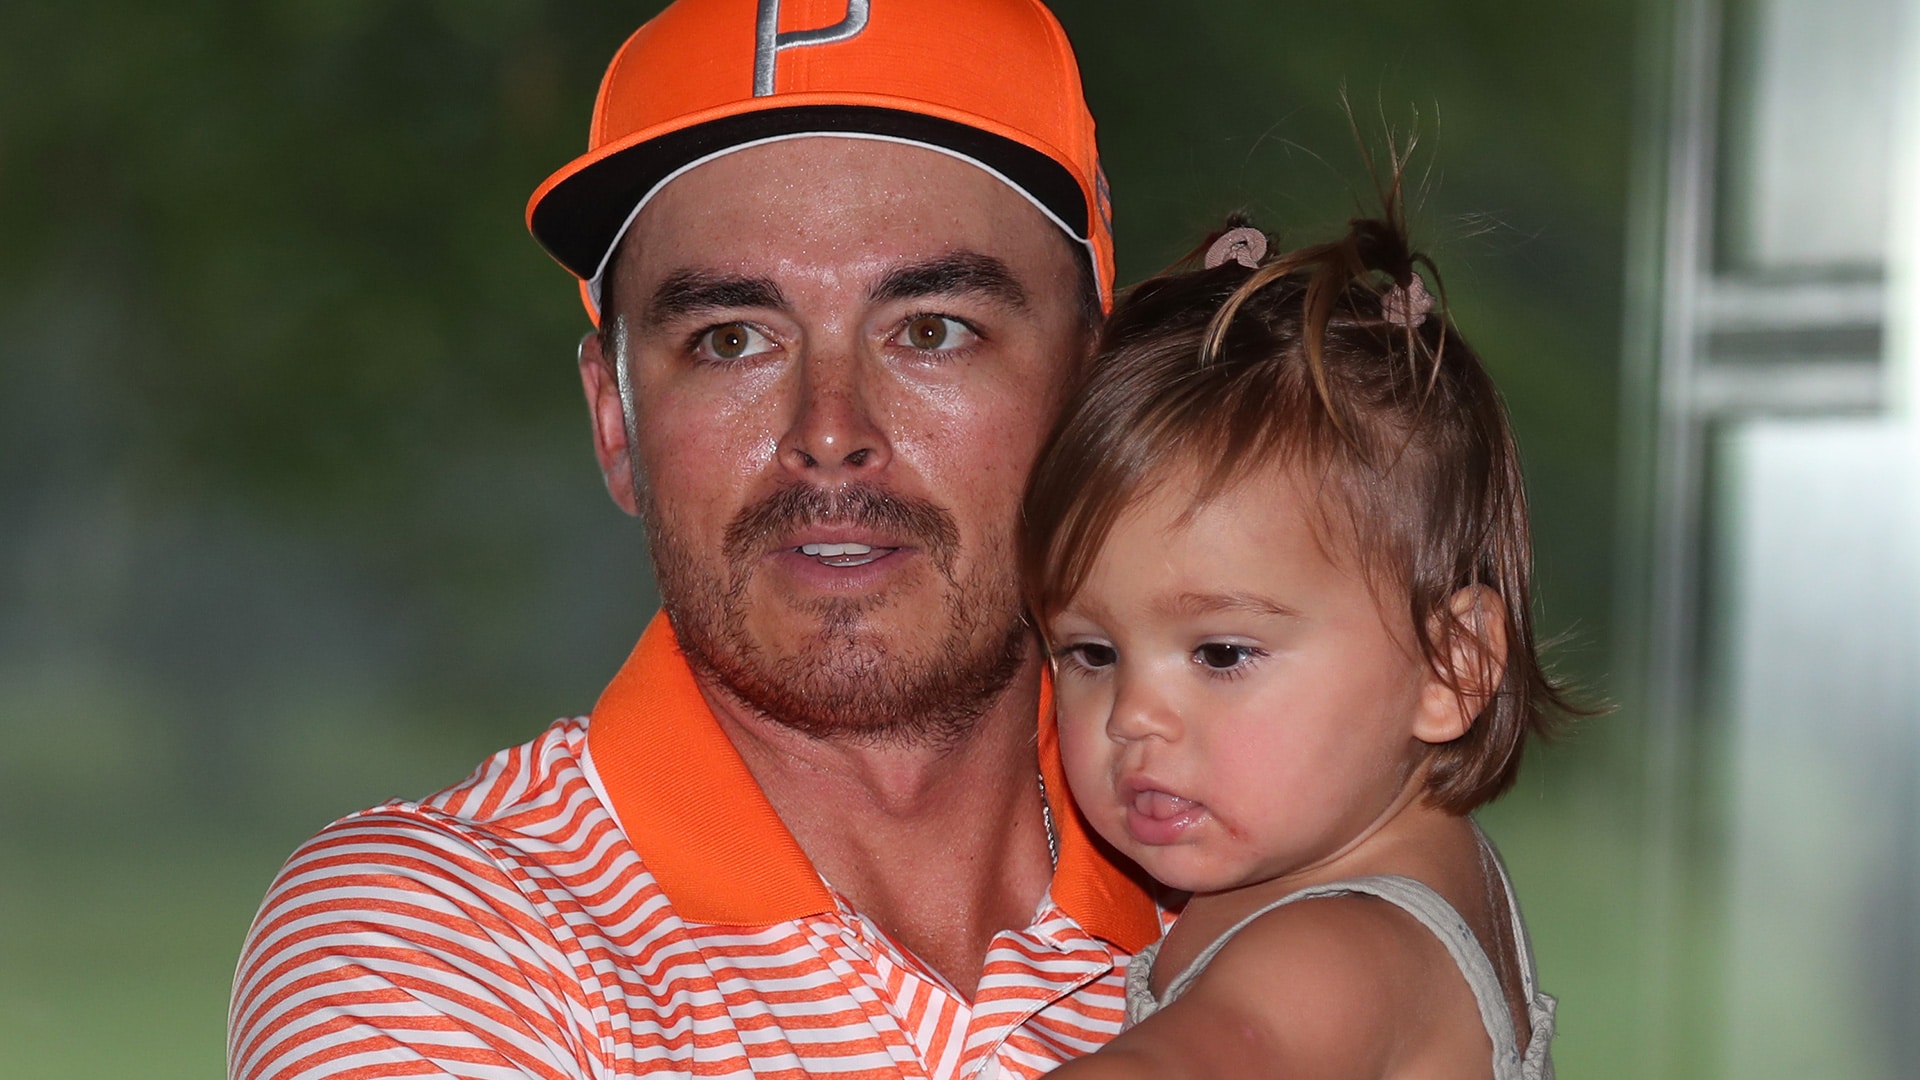 A weight lifted: Rickie Fowler finds missing link, ends win drought